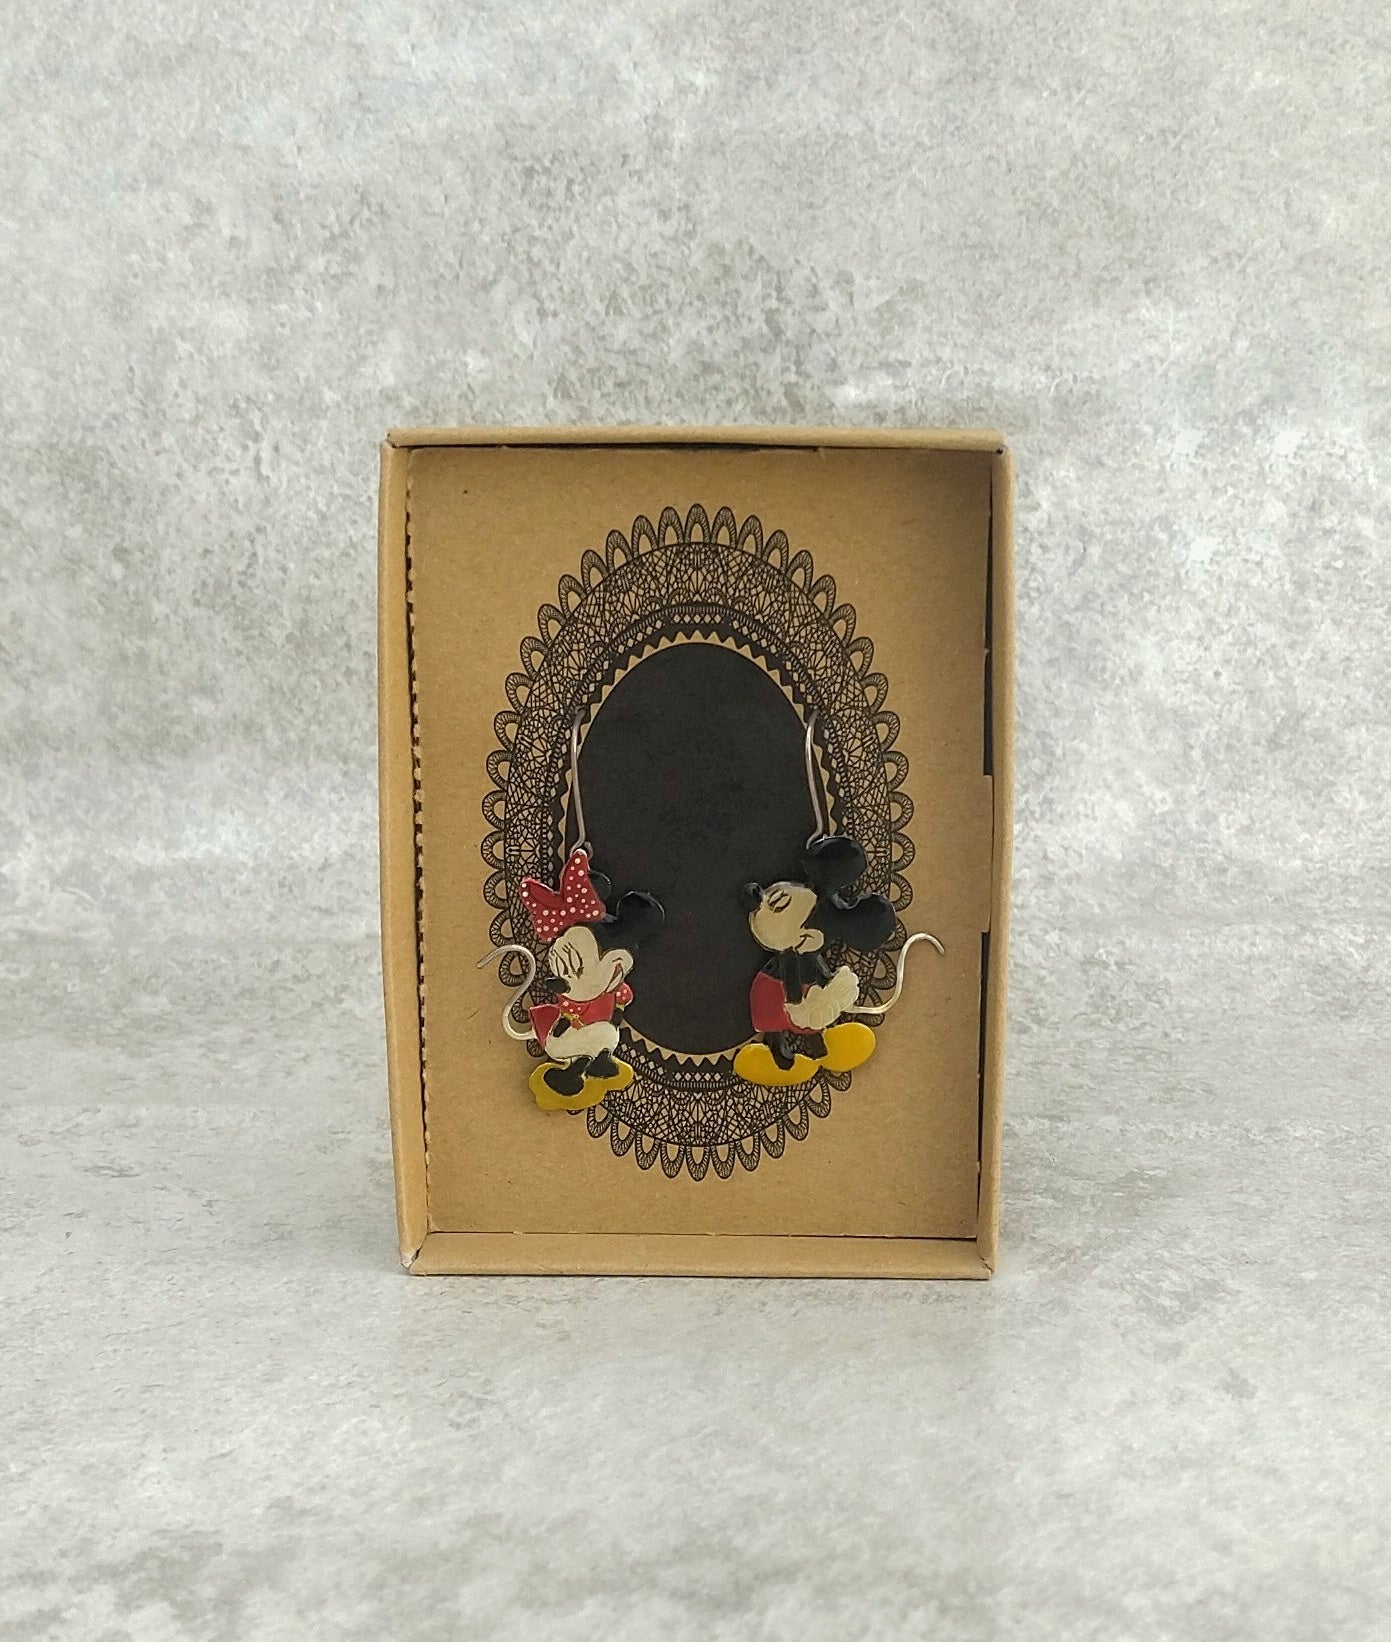 Mickey And Minnie Mouse Earrings